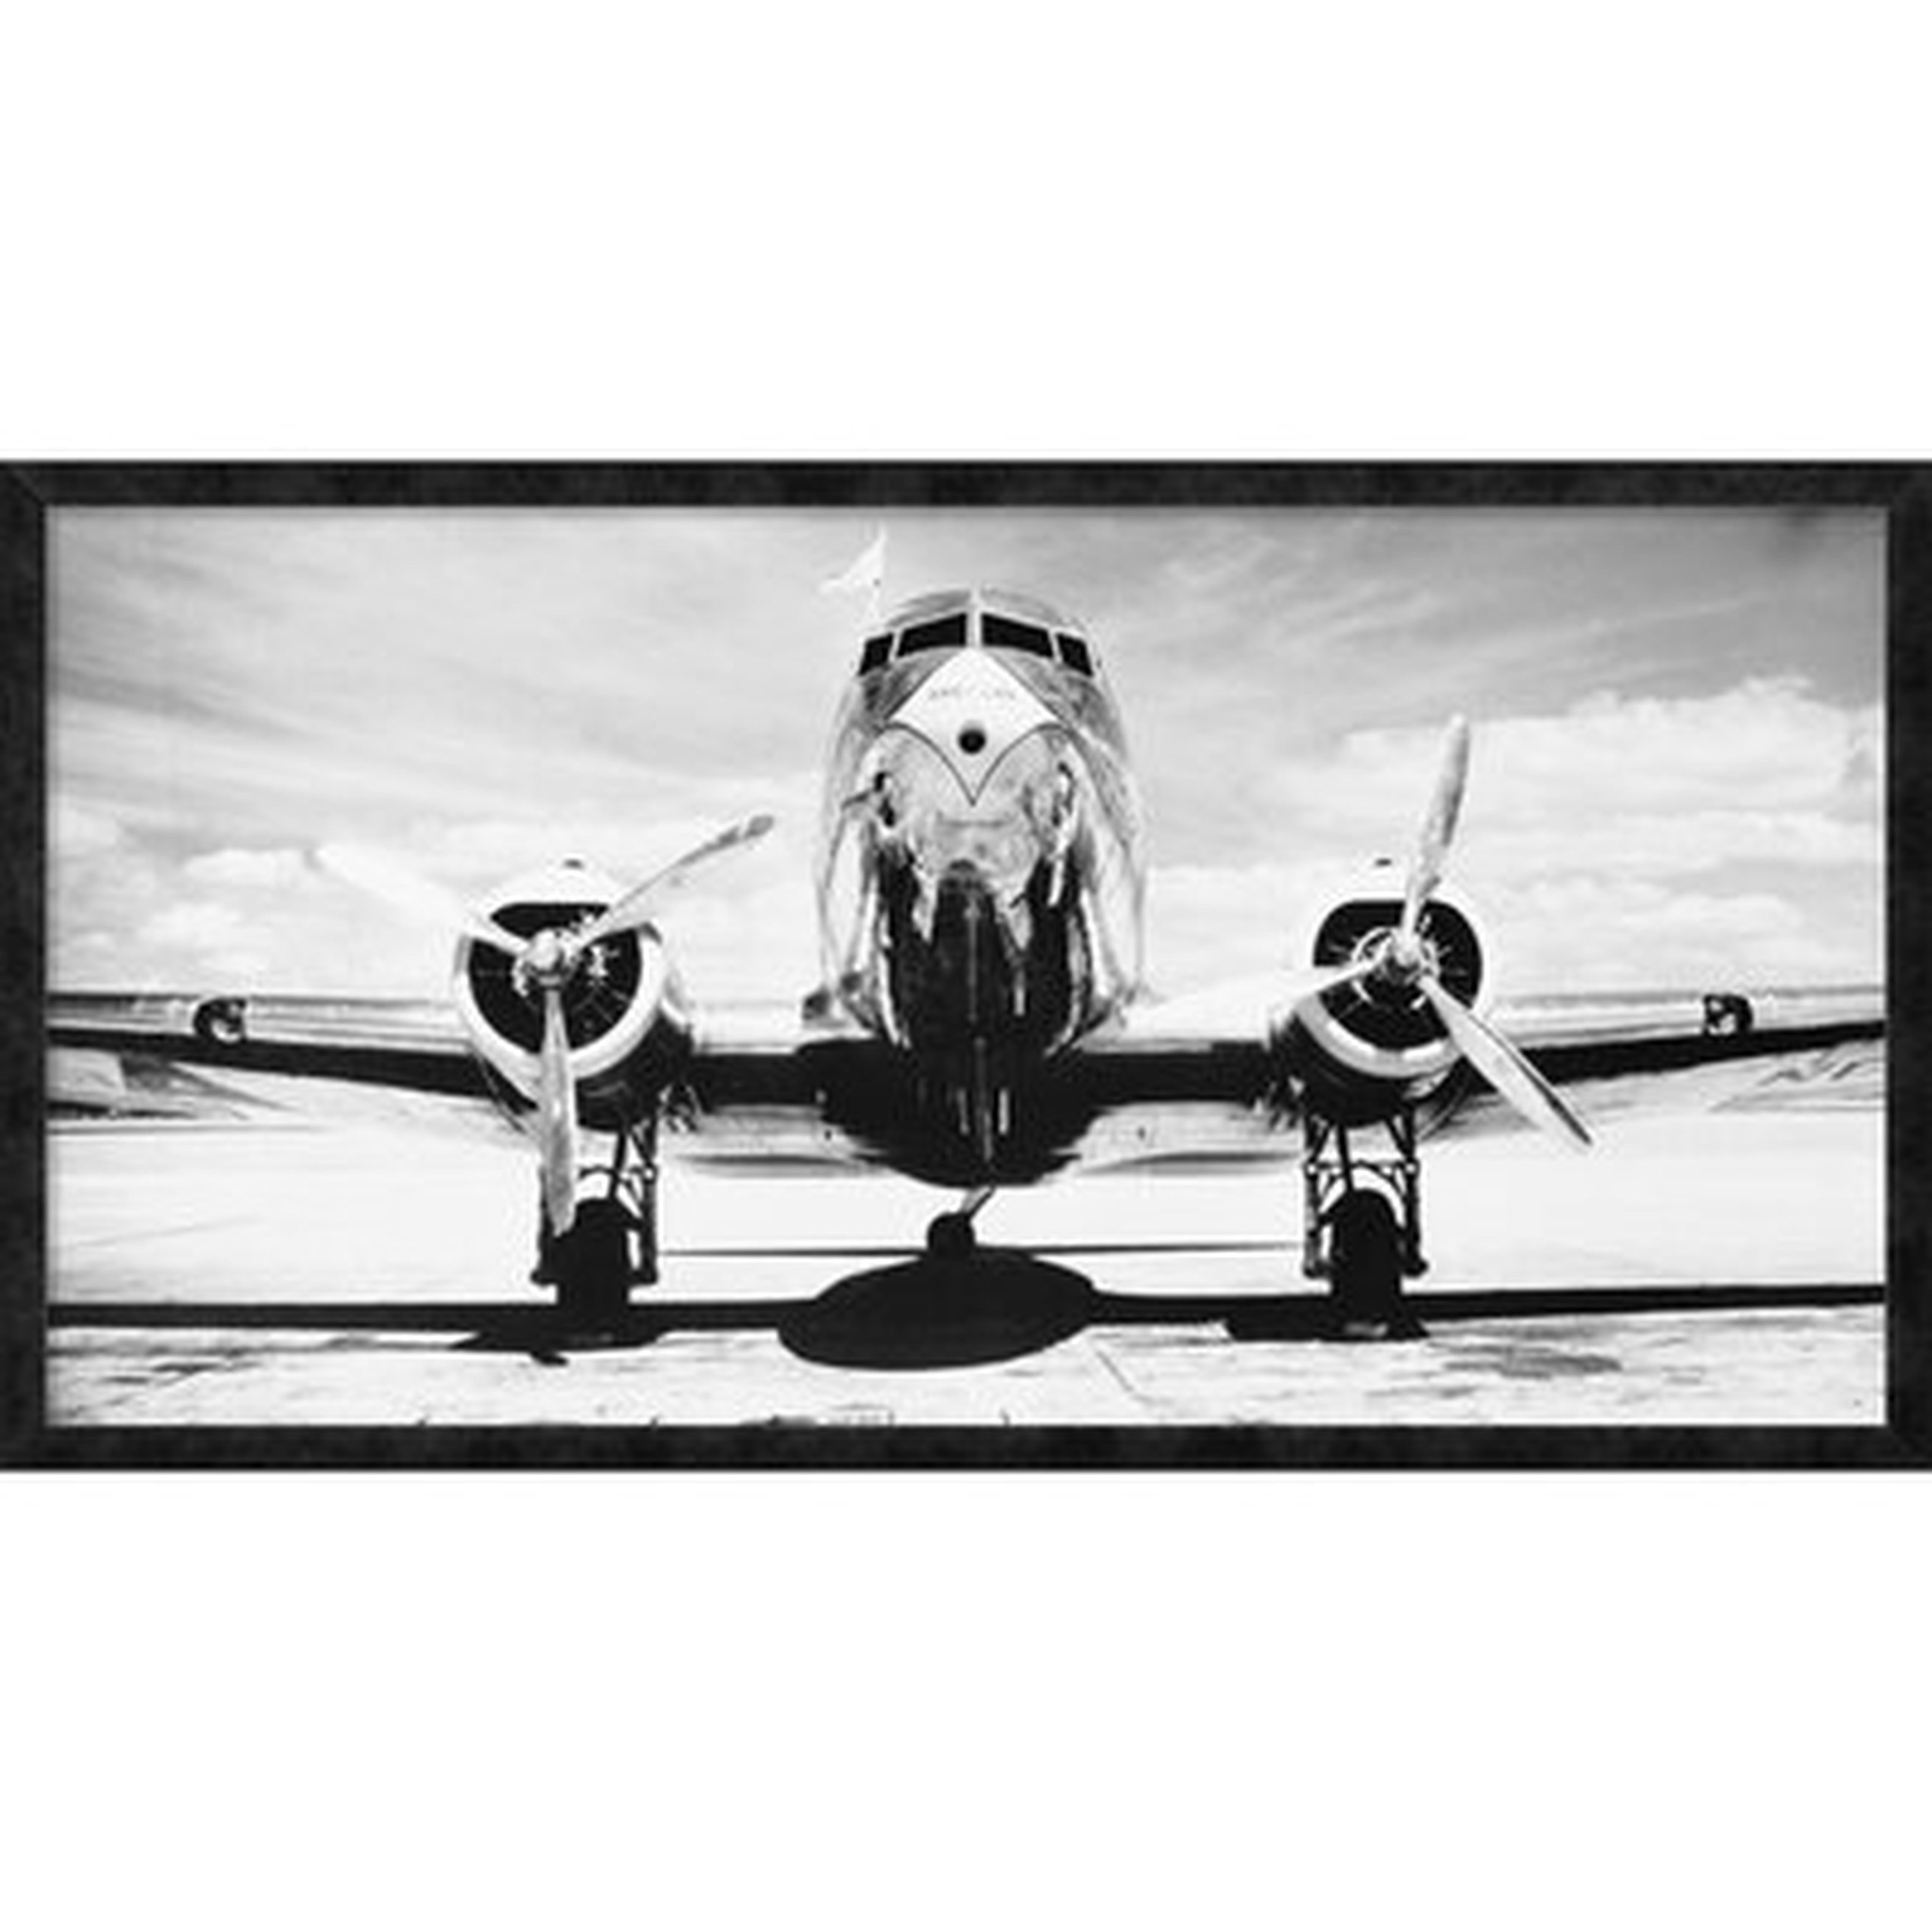 Passenger Airplane on Runway by Philip Gendreau - Picture Frame Photograph Print on Canvas - Wayfair